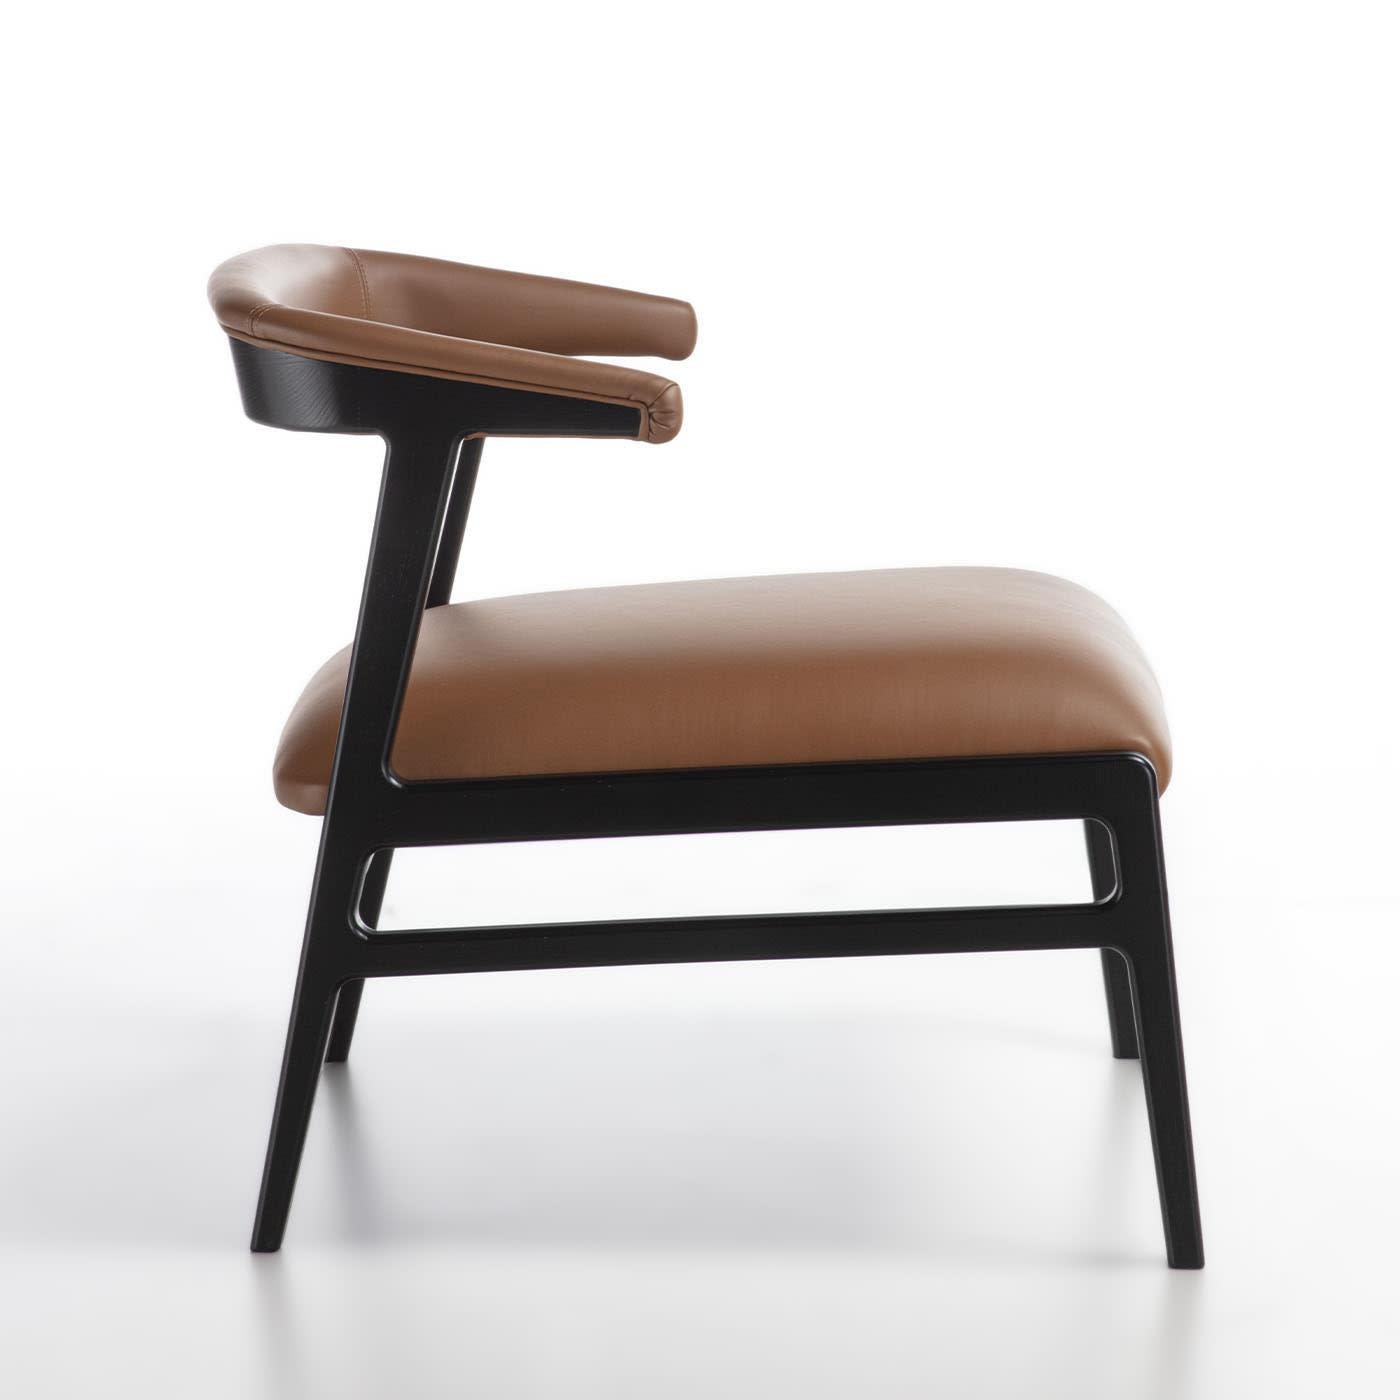 Lounge chair from the Aida line with an essential and light design. Structure in solid wood, upholstered back with an enveloping shape characterized by fine stitching. Seat and back upholstered in brown leather.